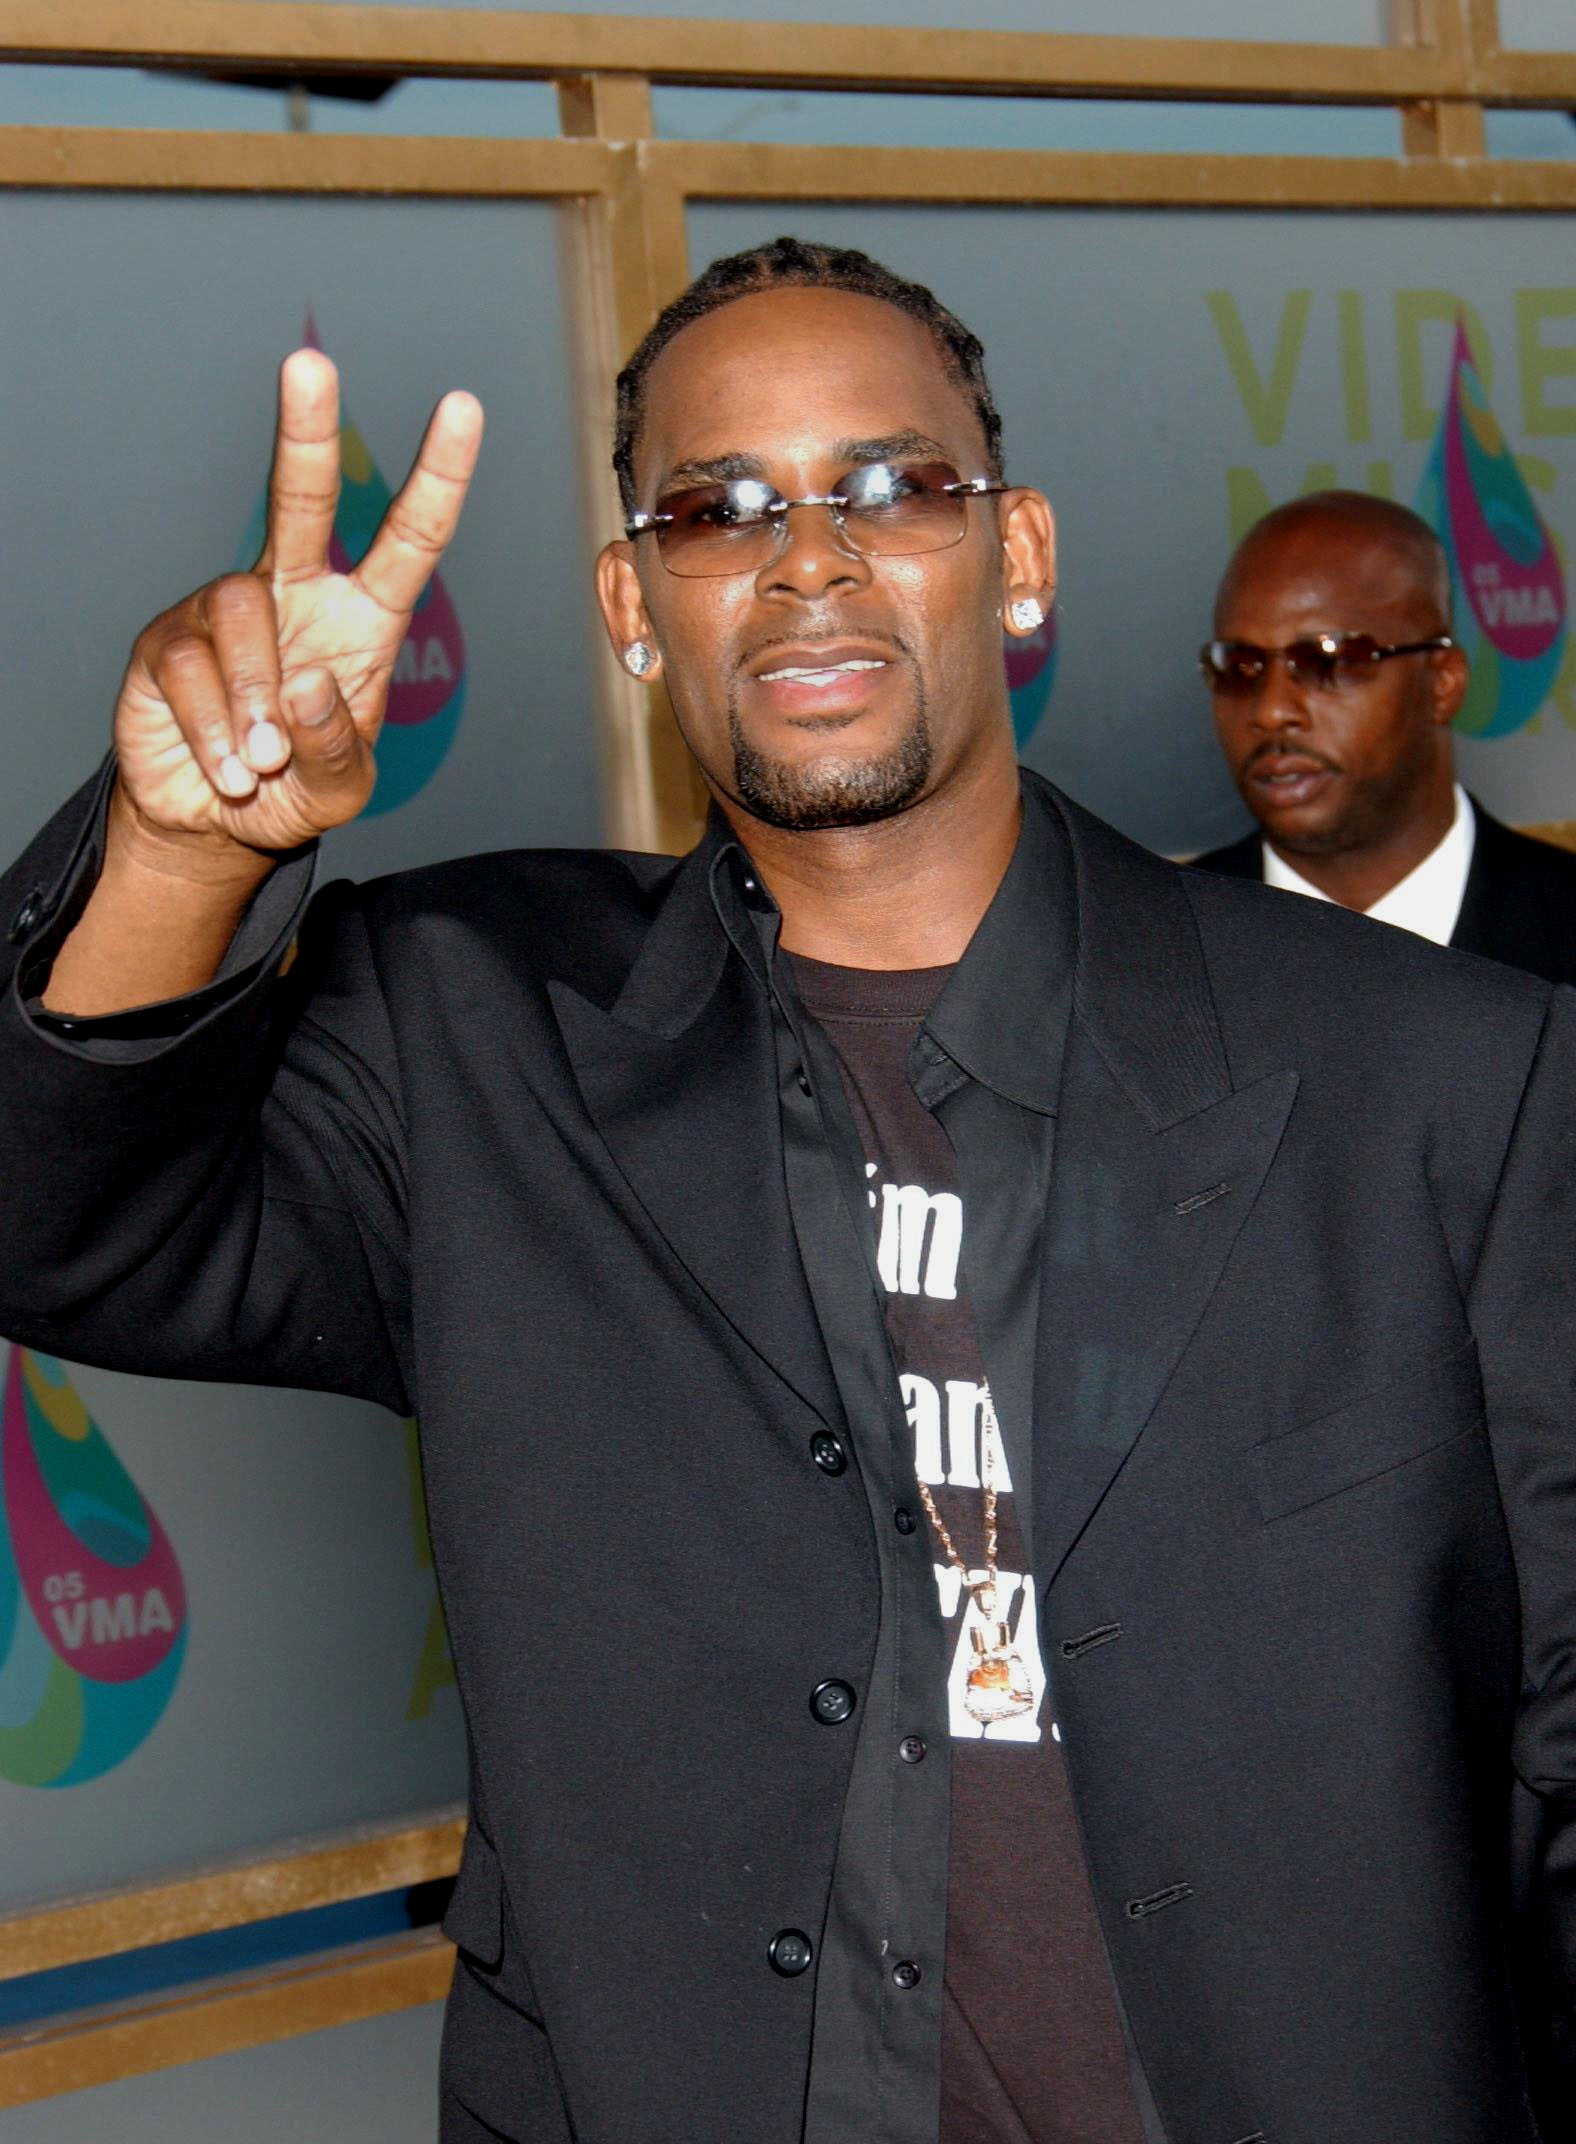 R Kelly arrives for the MTV Video Music Awards in Florida in 2005 (Anthony Harvey/PA)